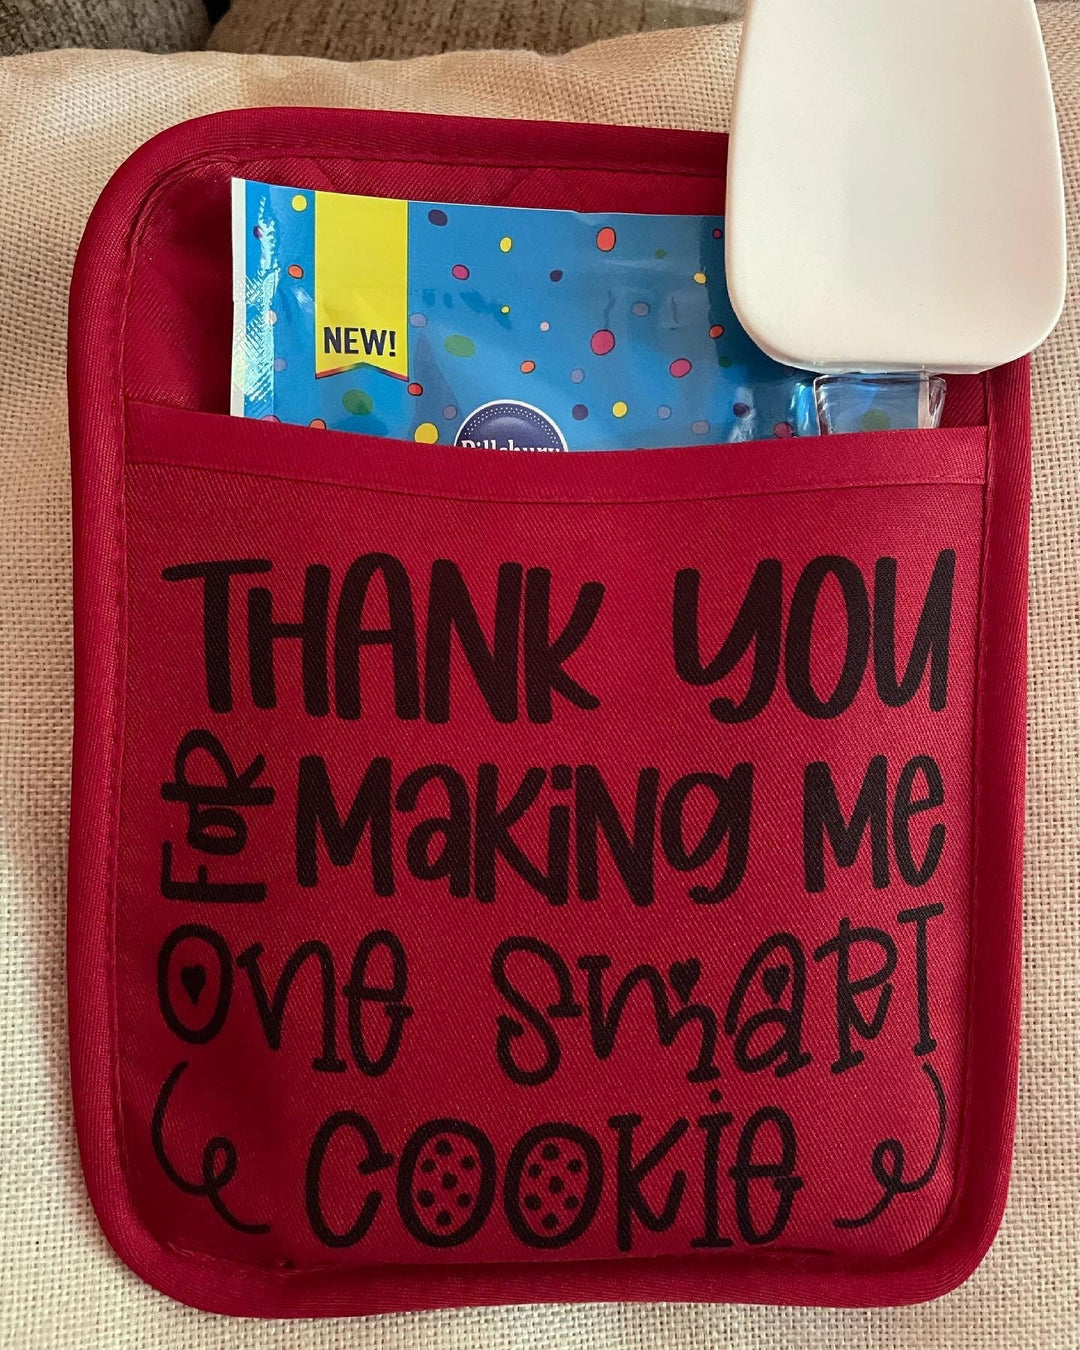 Customized Pot Holder Cookie Sets